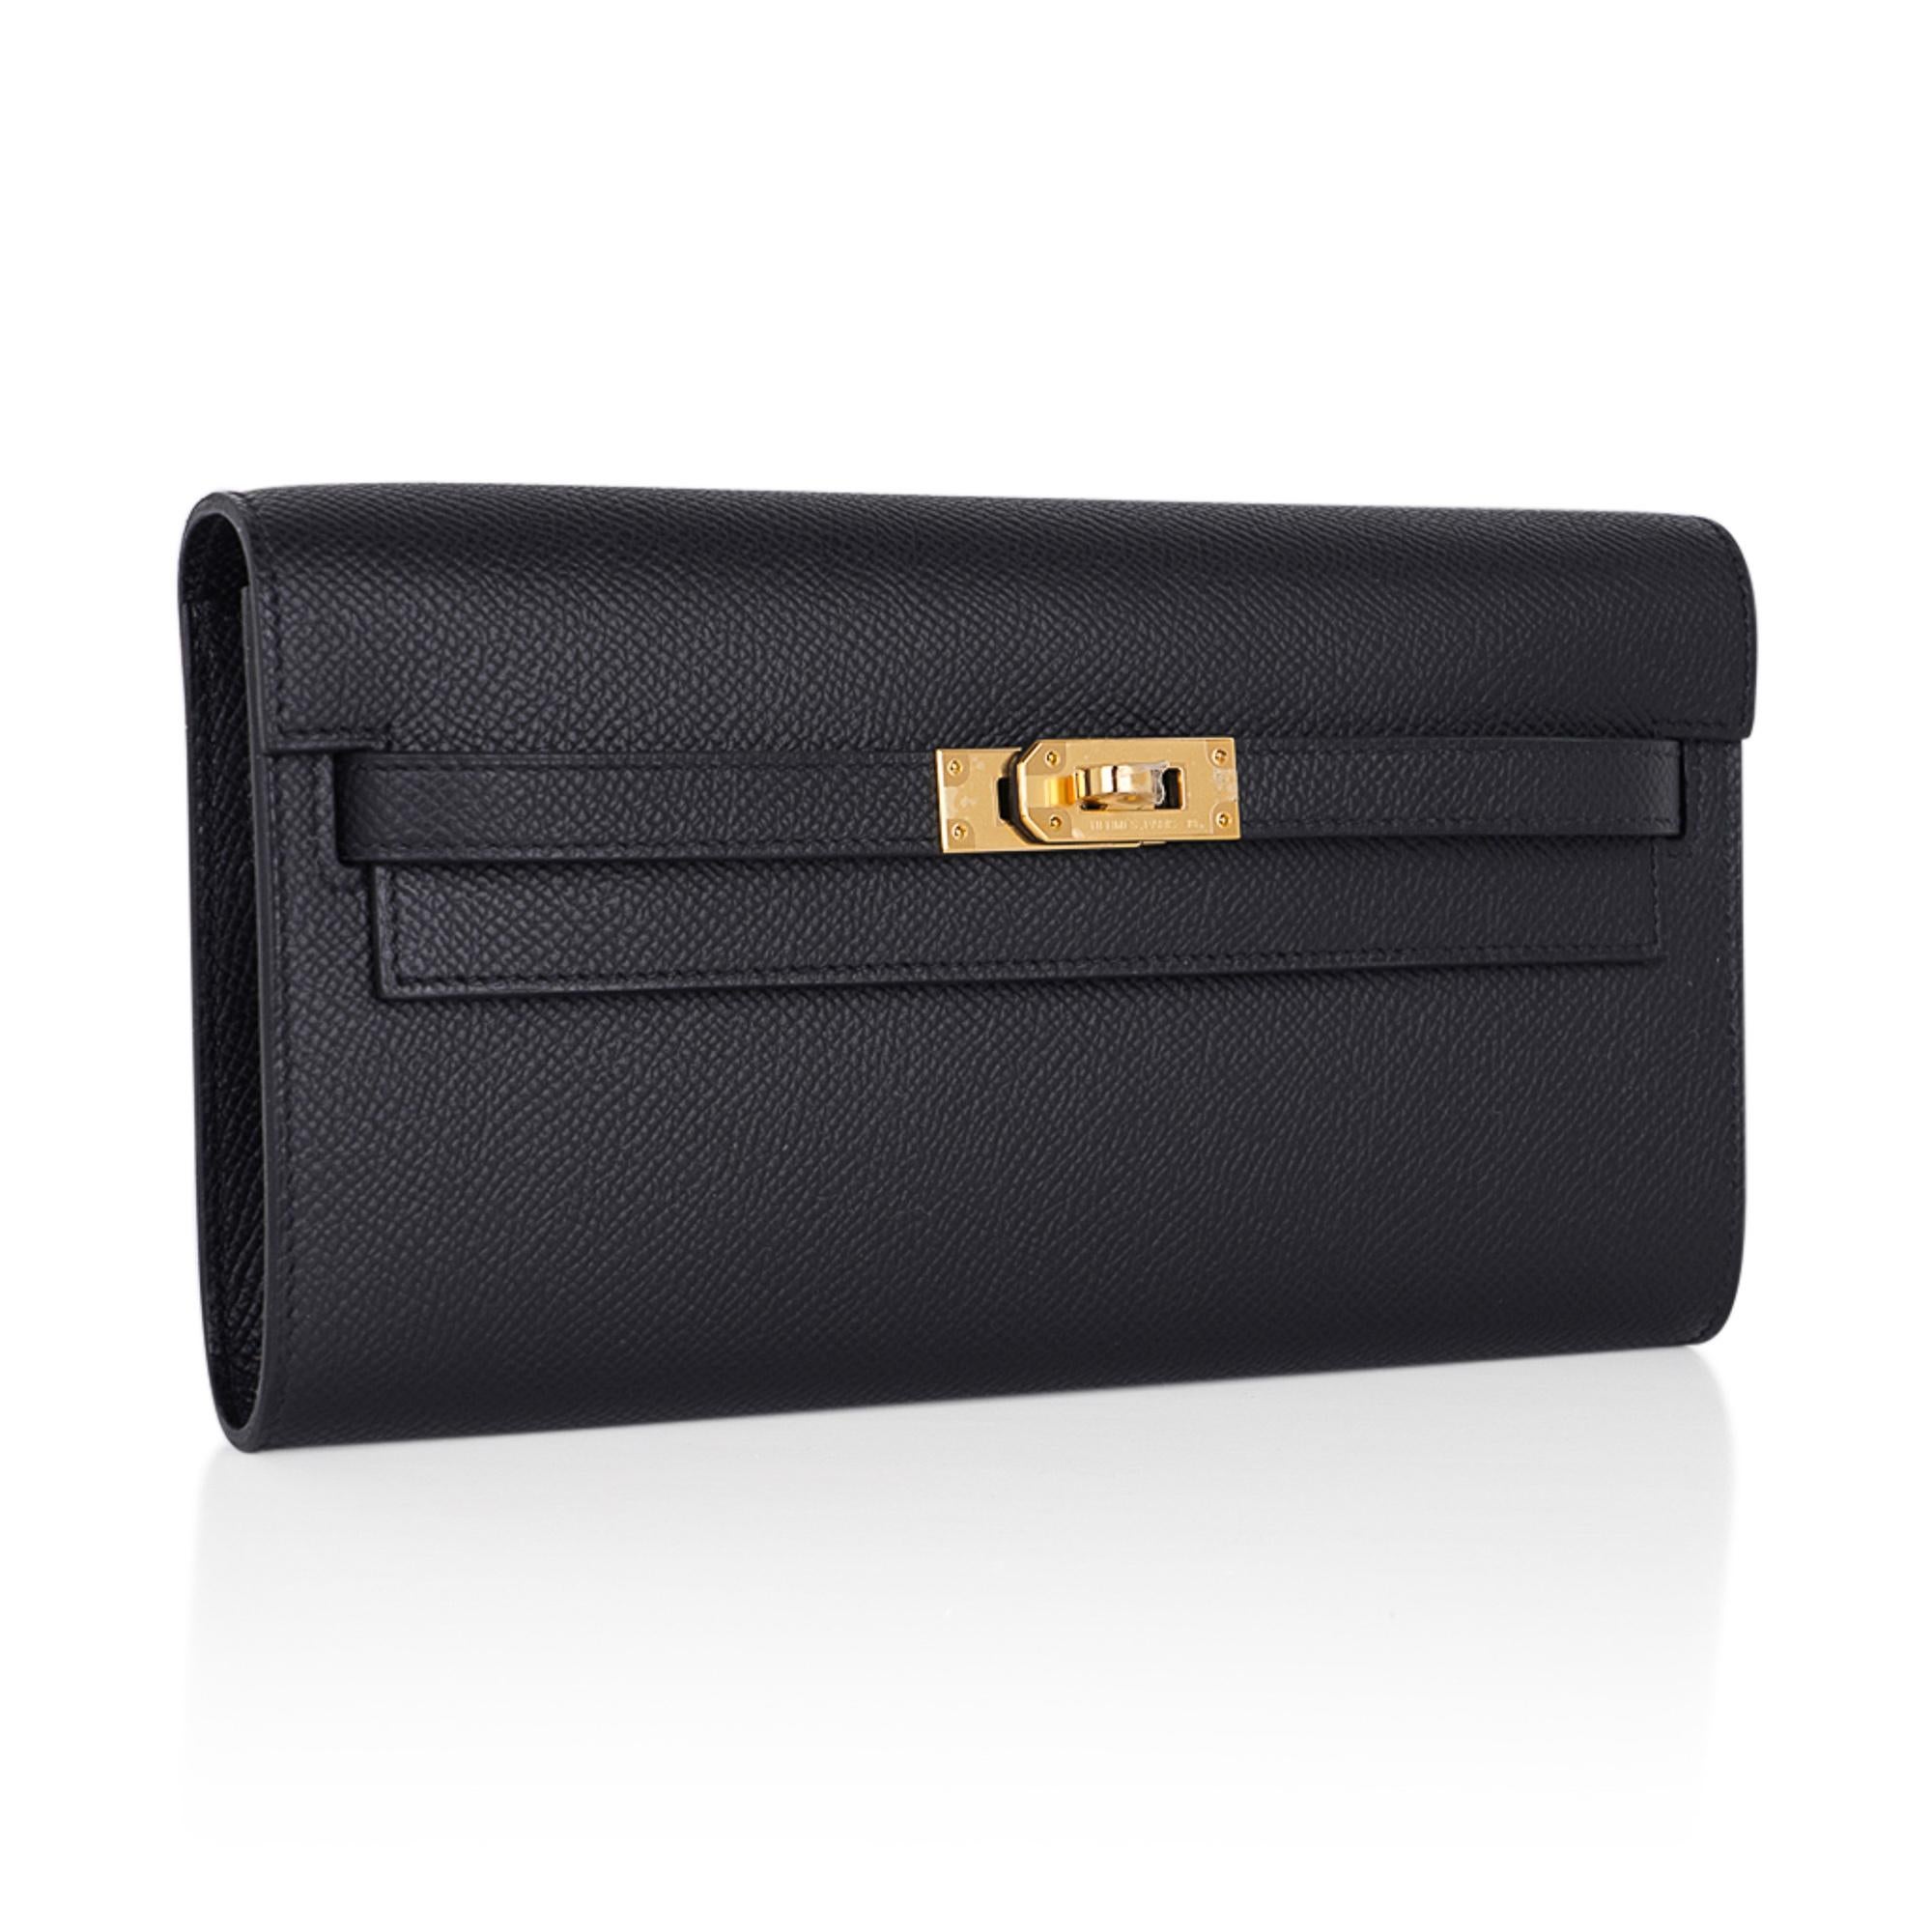 Mightychic offers an Hermes Kelly Classique To Go wallet featured in classic Black.
Epsom leather with Gold hardware.
Removable shoulder strap changes from a crossbody, to a wallet or clutch.
Interior has four (4) credit card slots and a zip pocket